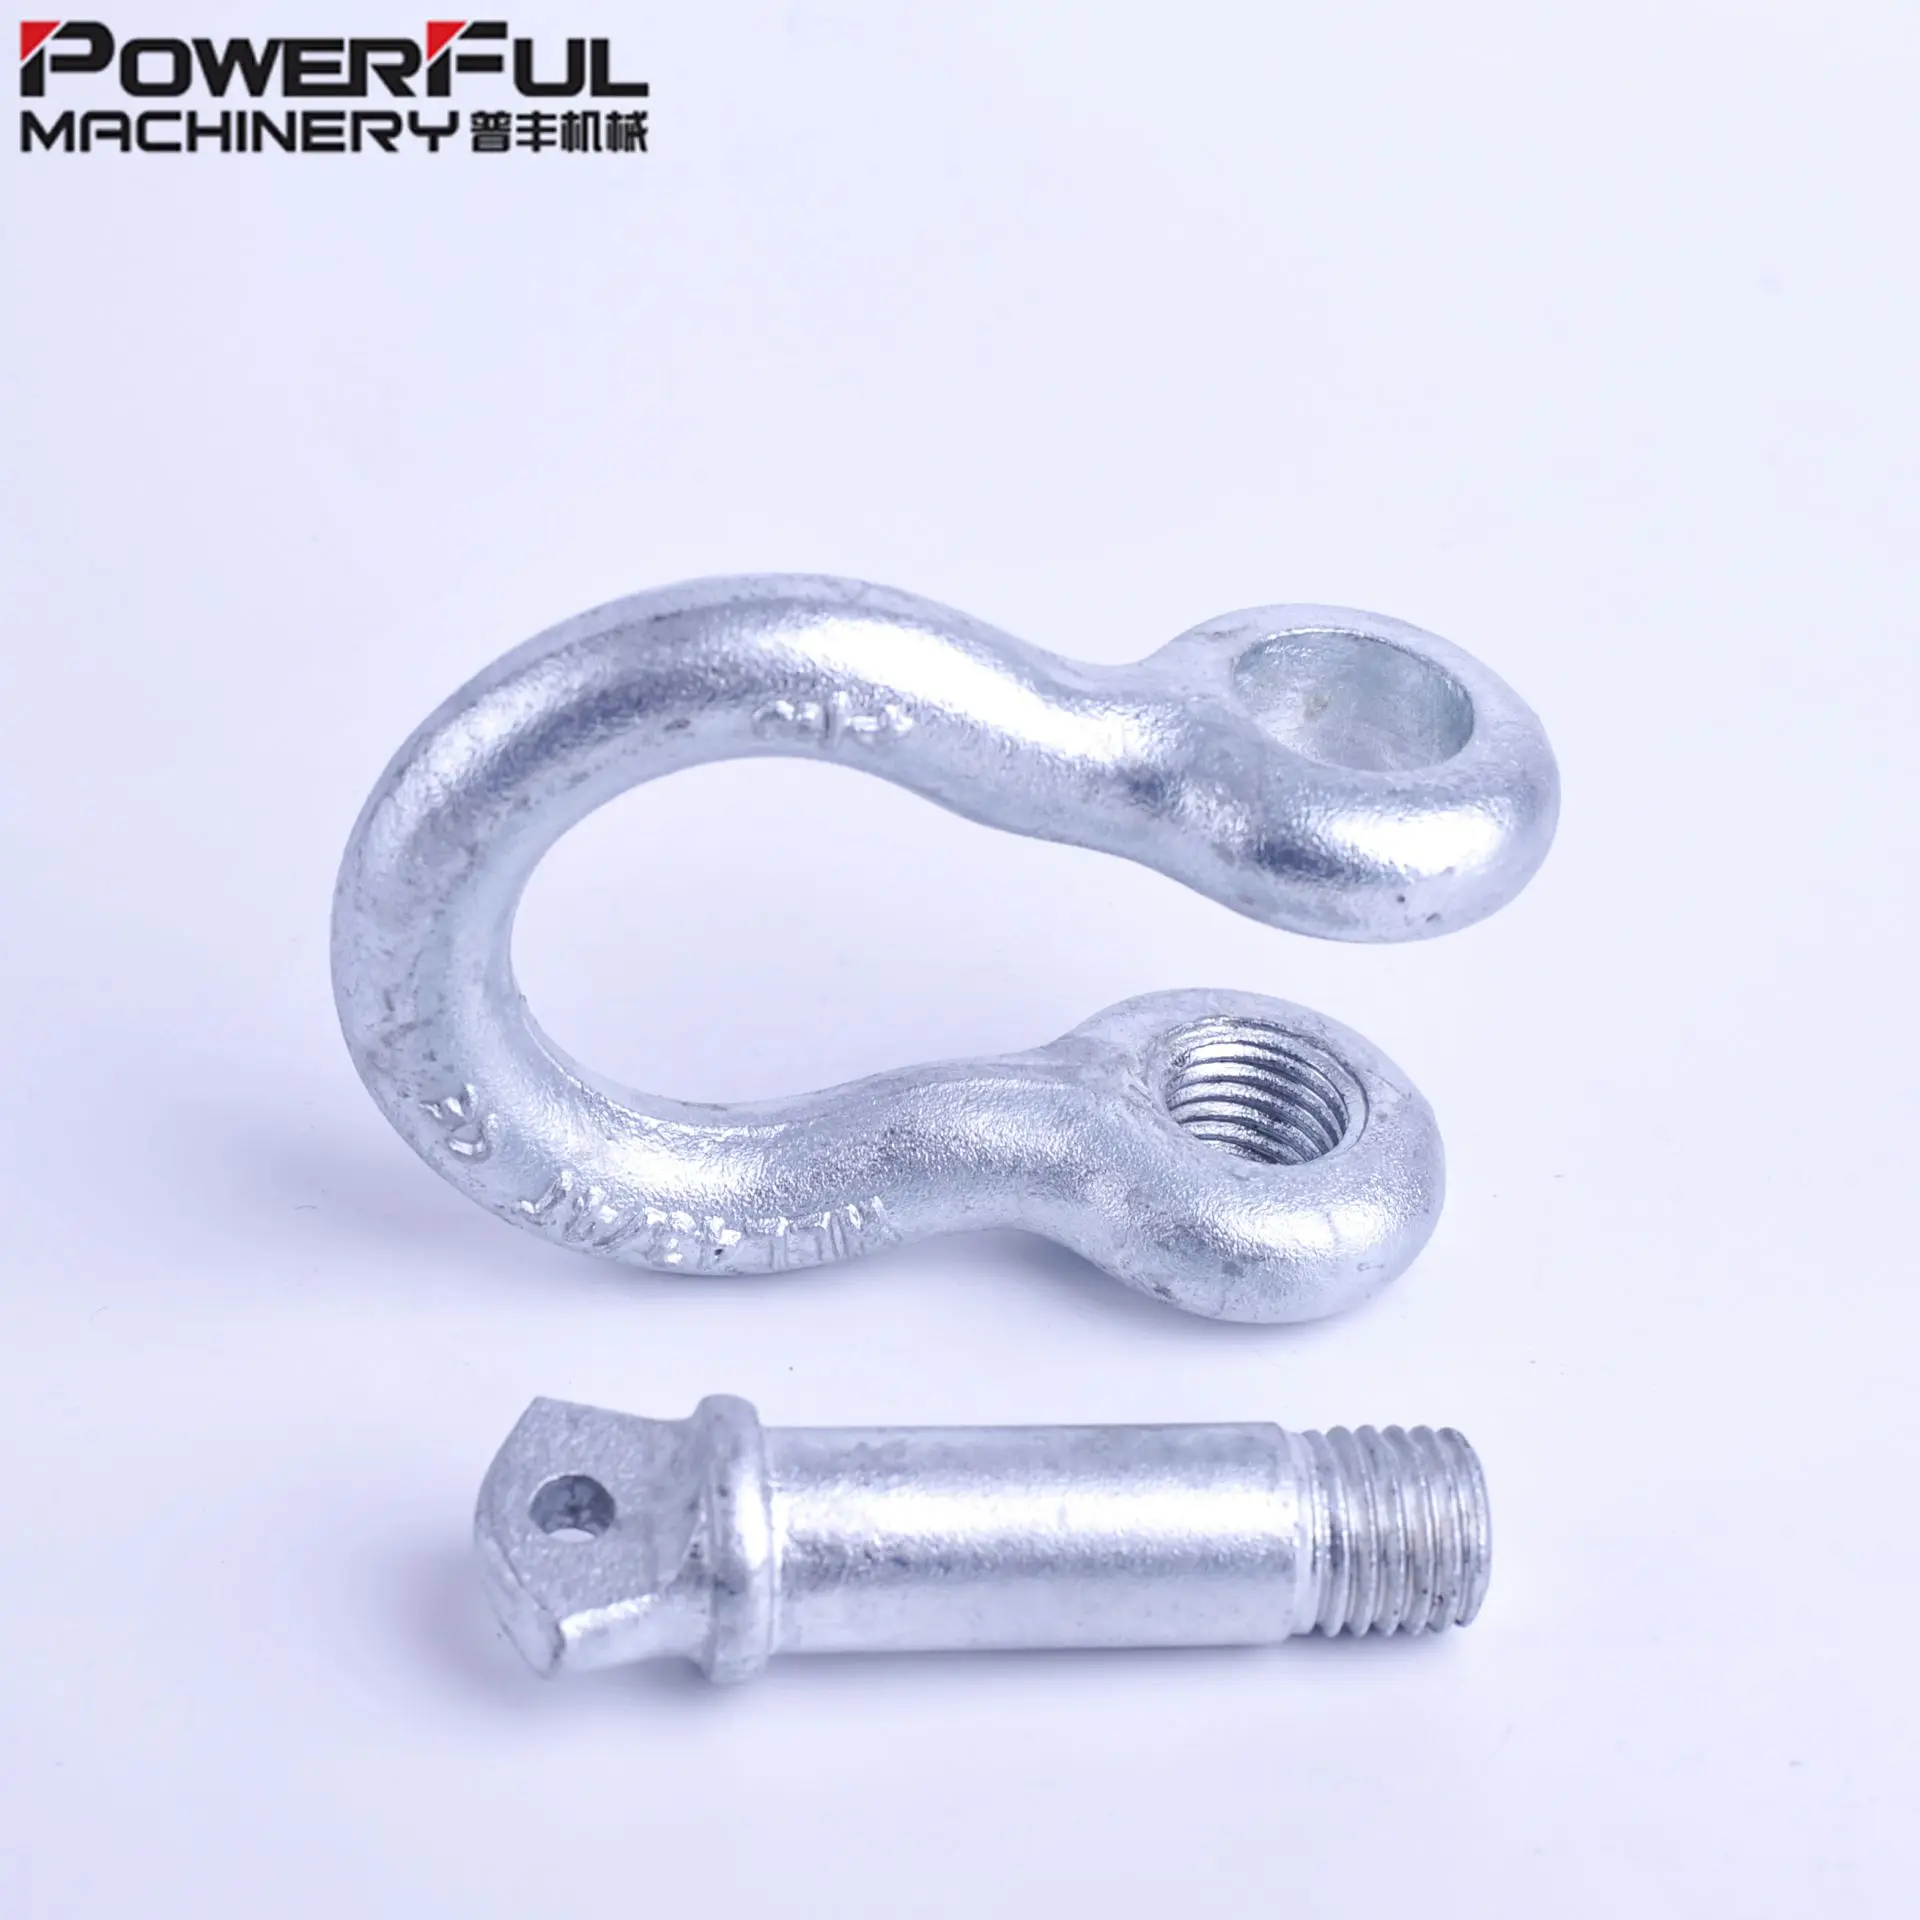 U.S. type G209 Electro Galvanized Shackle 4 Times Safety Factor